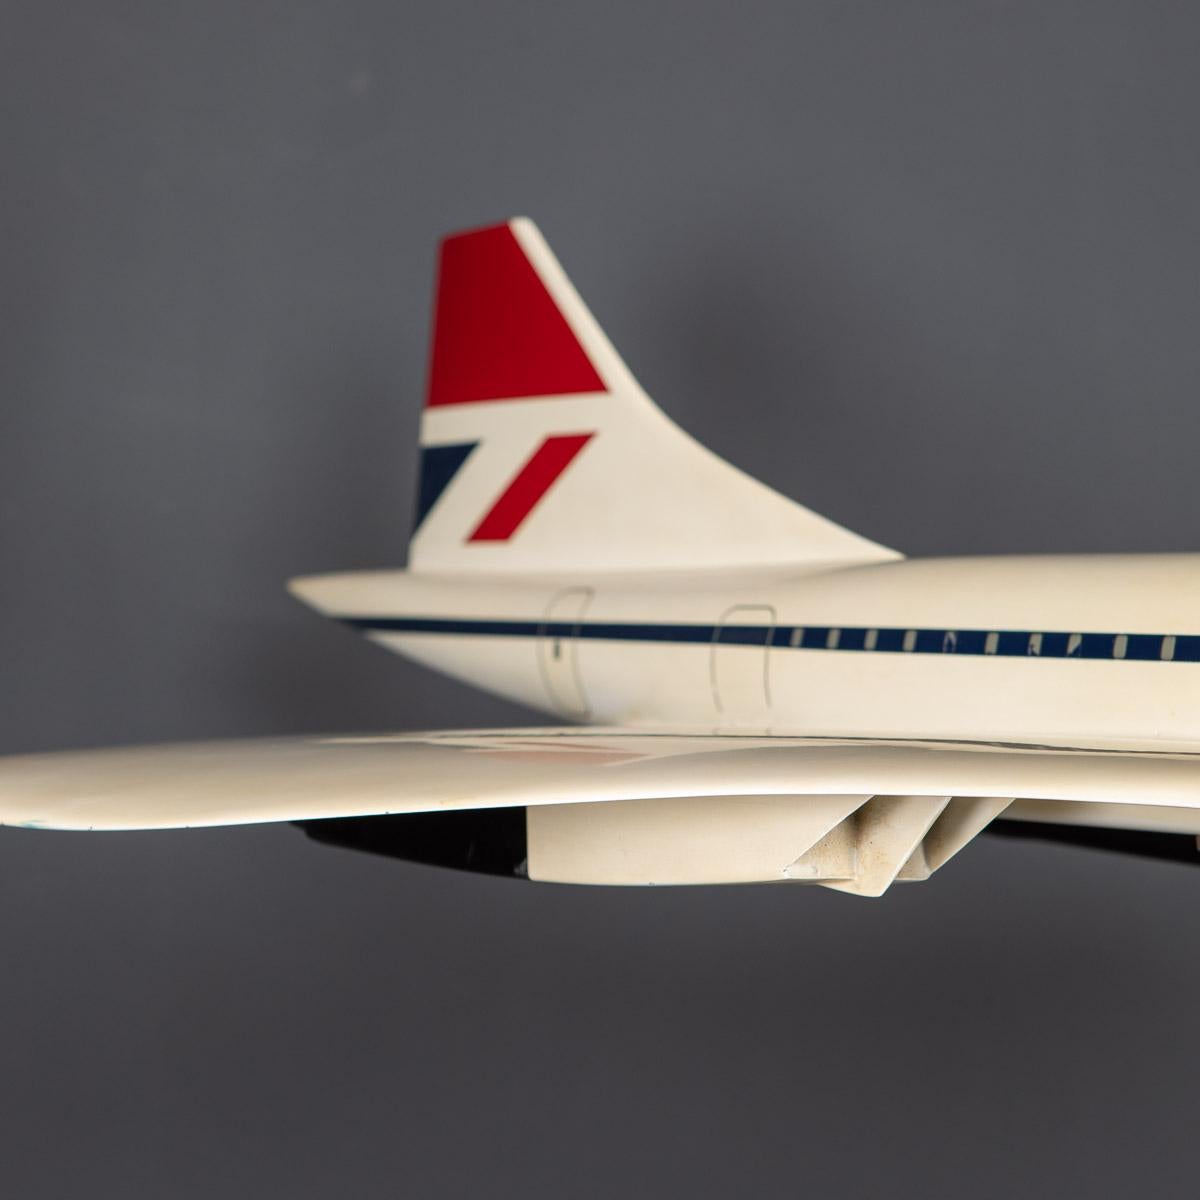 Concorde Model Made by Space Models, England, c.1990 5